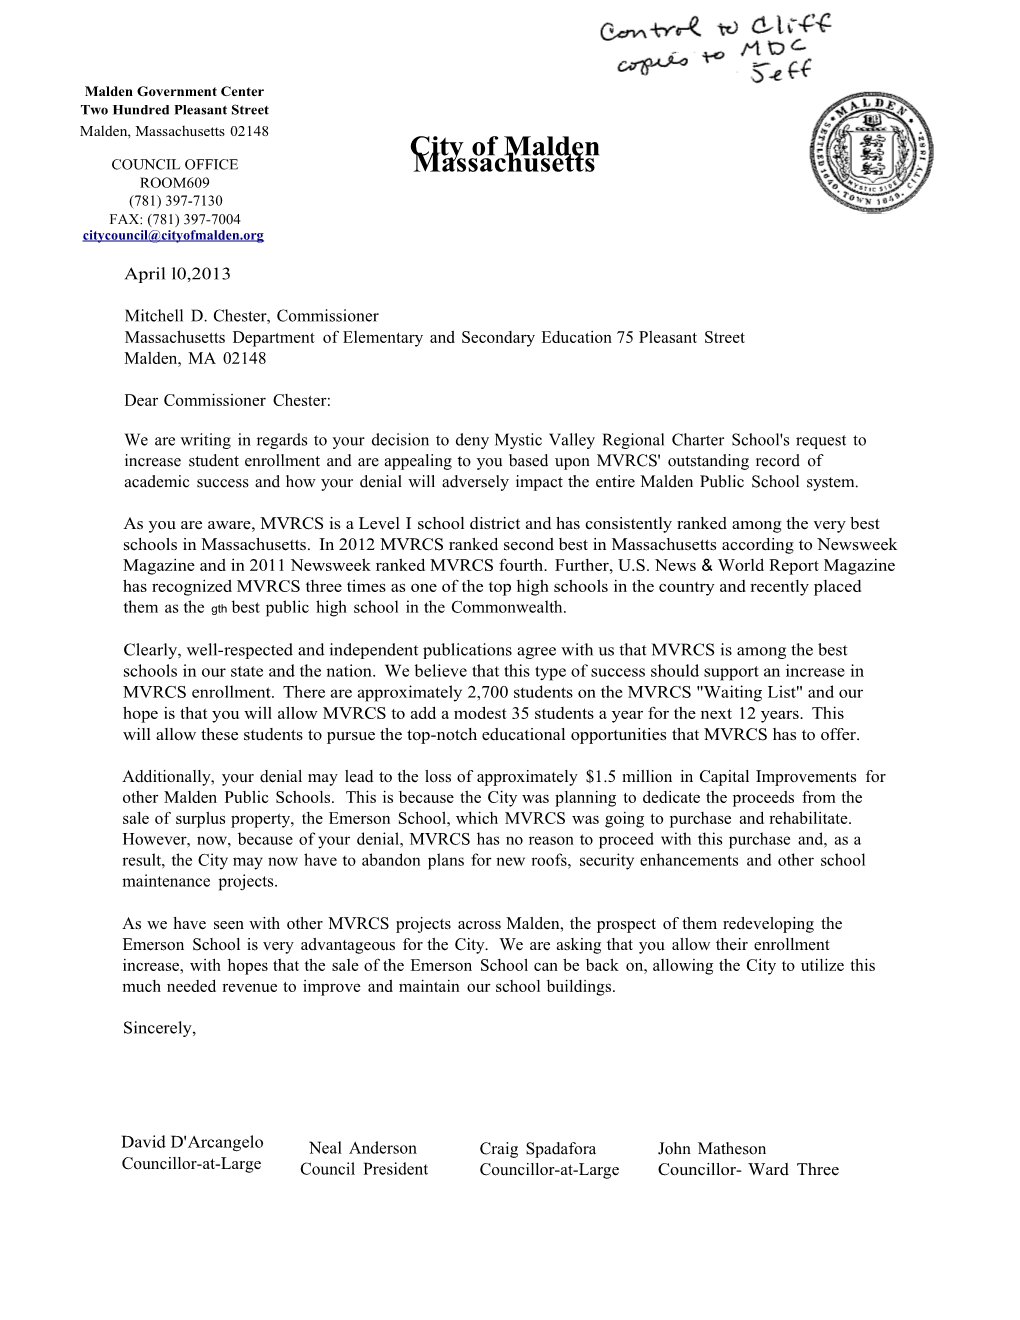 Mystic Valley Request for Review, Correspondence from Malden City Councilors, May 2013